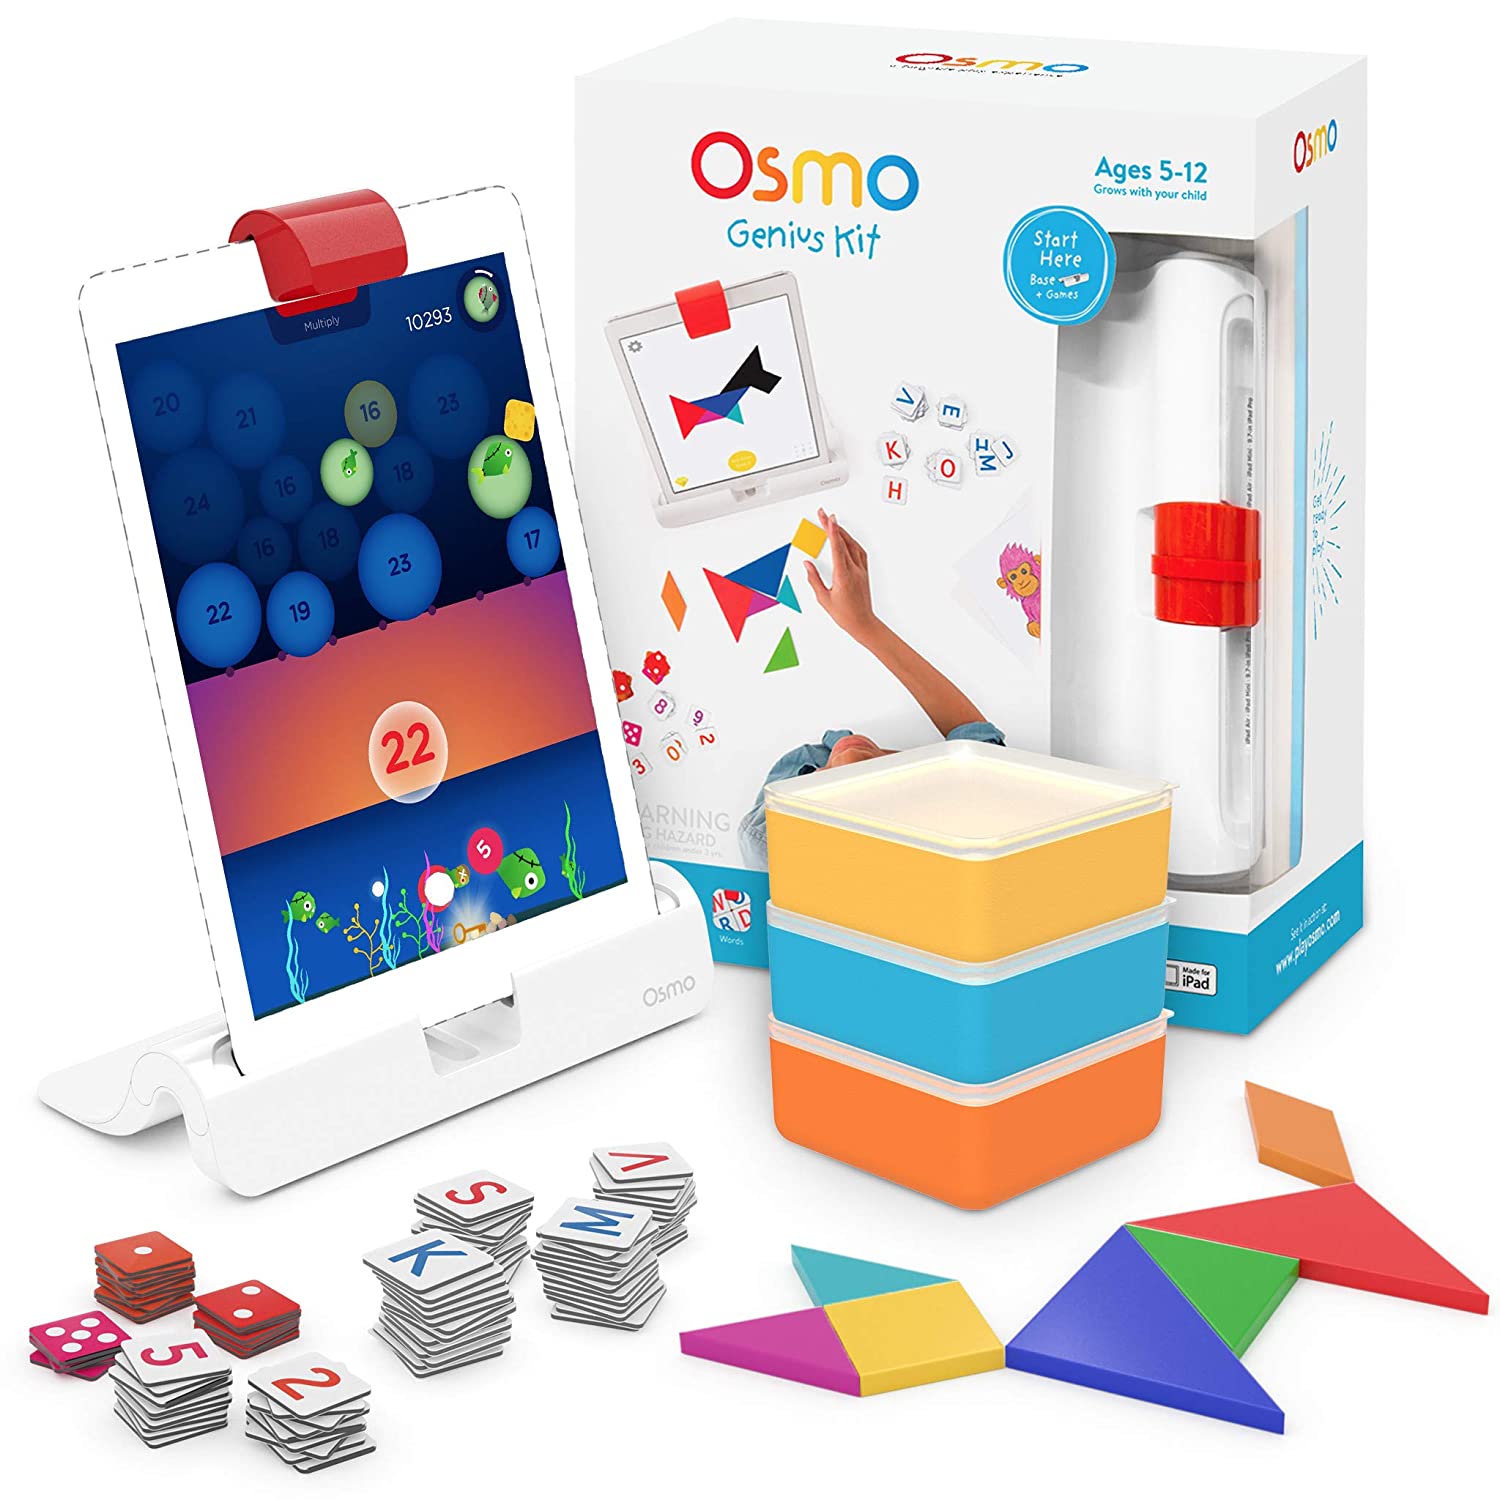 Osmo - Genius Kit for iPad - 5 Hands-On Learning Games - Ages 6-10 - Math, Spelling, Problem Solving & Creativity - STEM - (Osmo iPad Base Included)